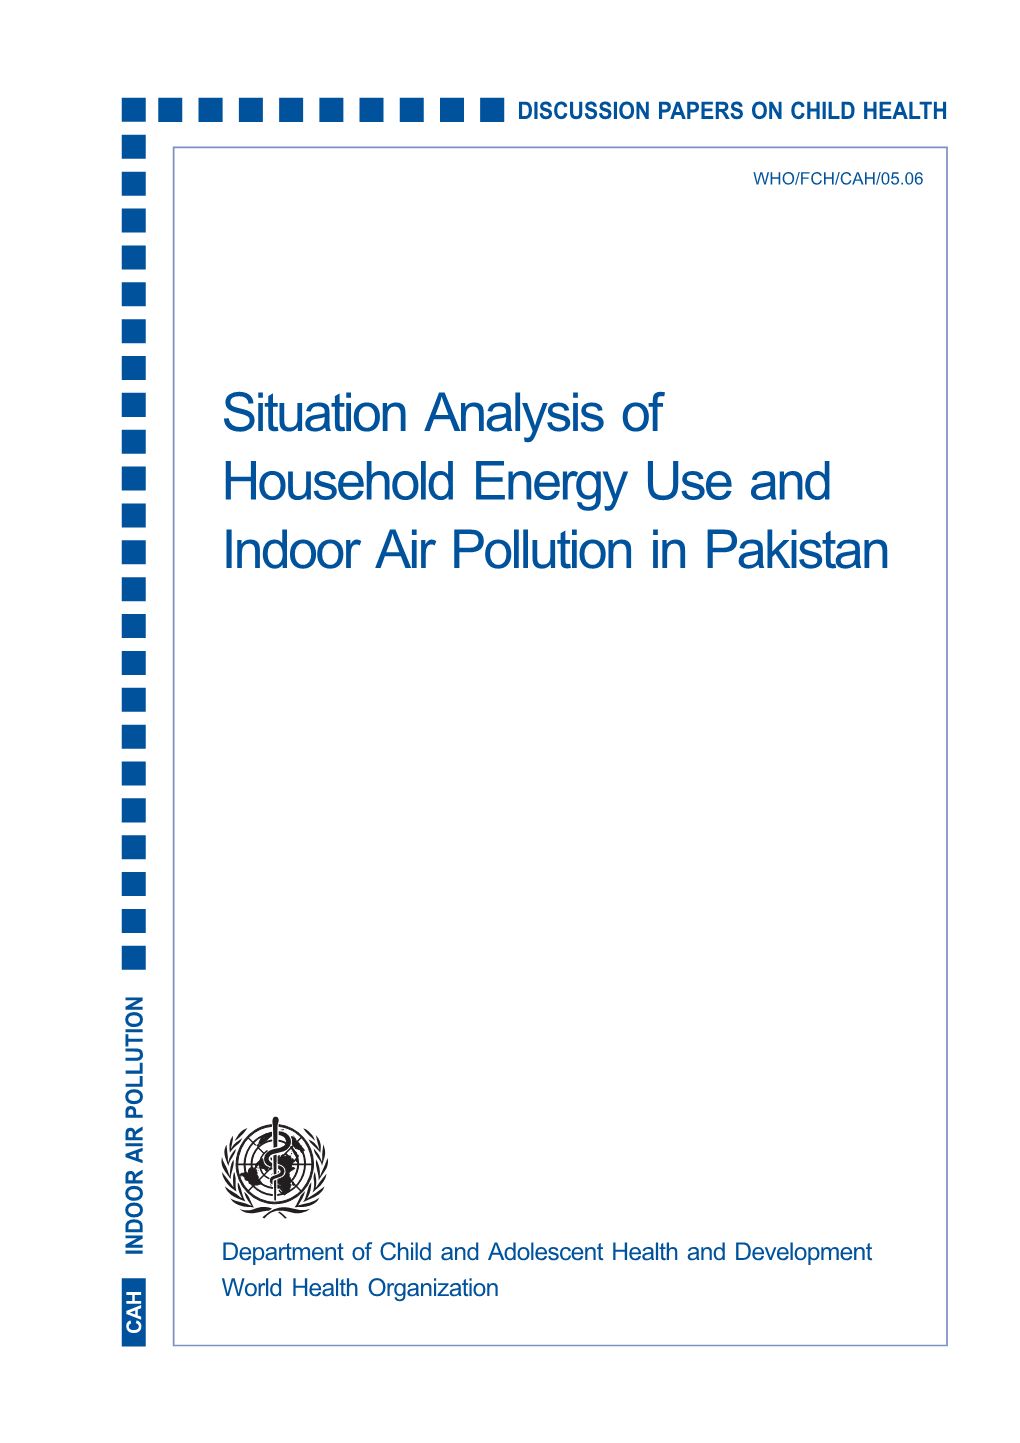 Situation Analysis of Household Energy Use and Indoor Air Pollution in Pakistan